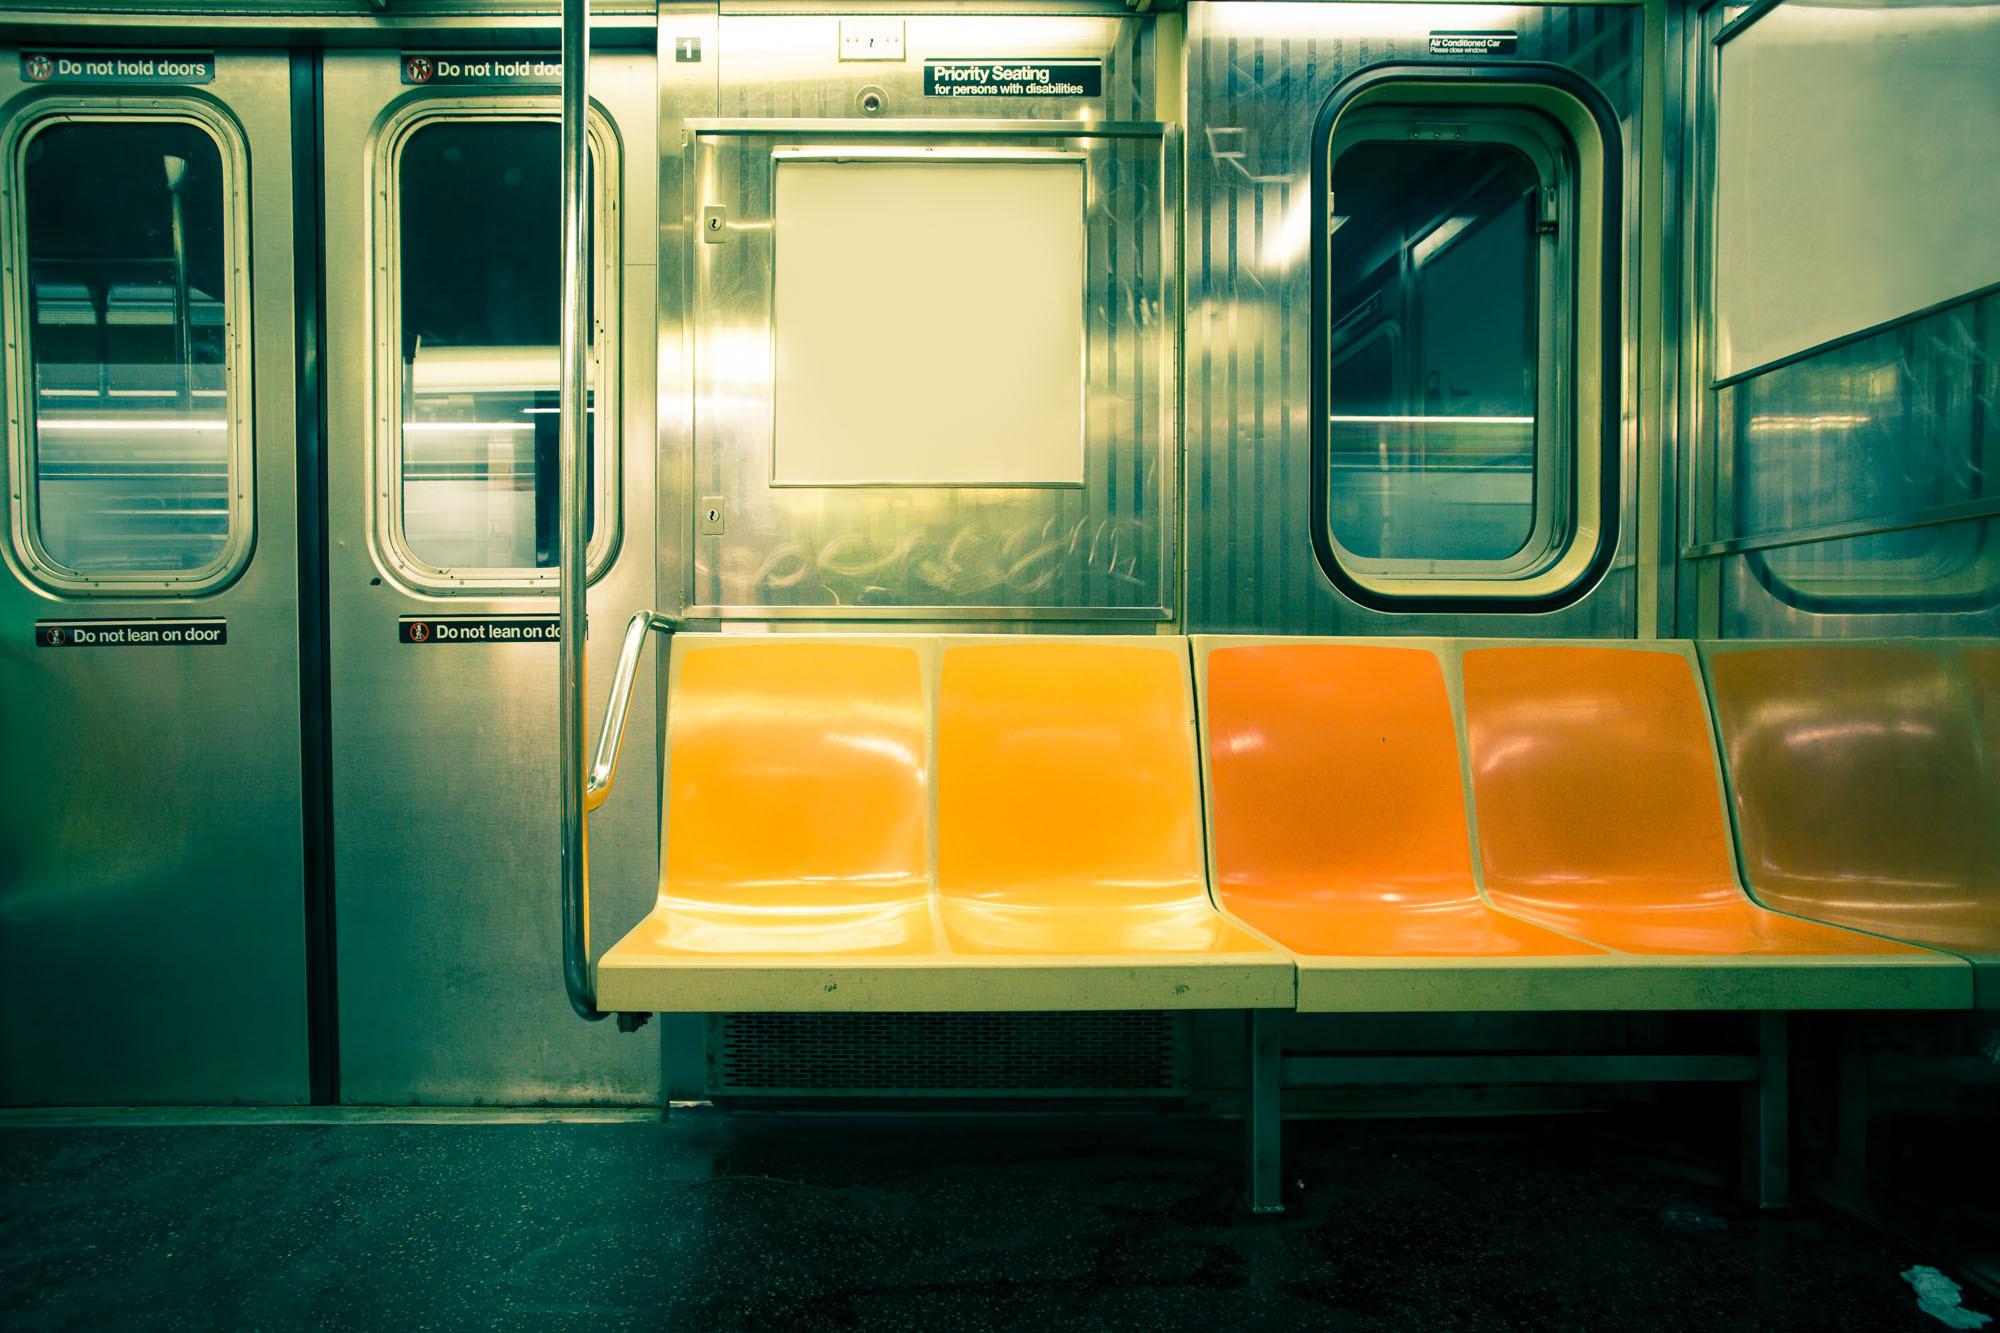 Black subway rider slashed after offering his seat